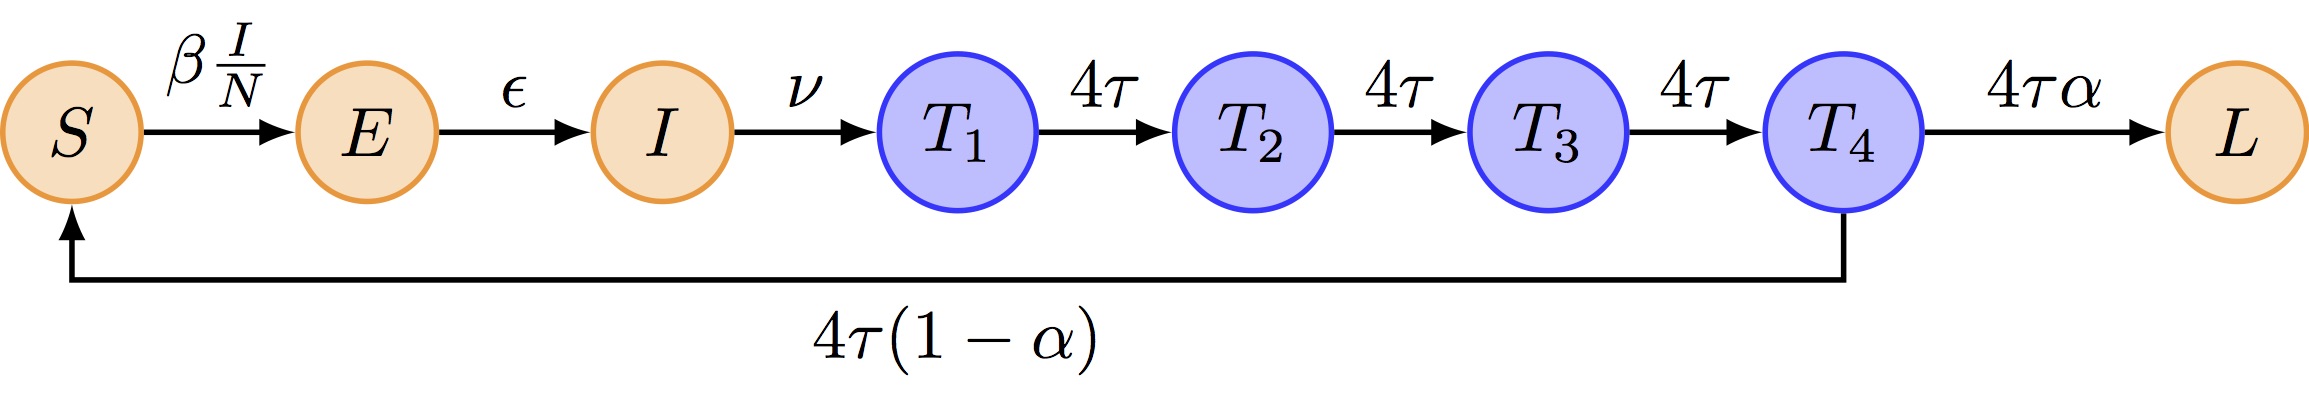 The SEIT4L model extends the SEITL model to account for memory effect in the contraction of the cellular response. The time spent in the T compartment (temporary protection) follows an Erlang distribution with mean D_\mathrm{imm}=1/\tau and shape equal to 4 and is modelled by 4 sub-stages T_{1,2,3,4}, each being exponentially distributed with mean equal to \frac{D_\mathrm{imm}}{4}.